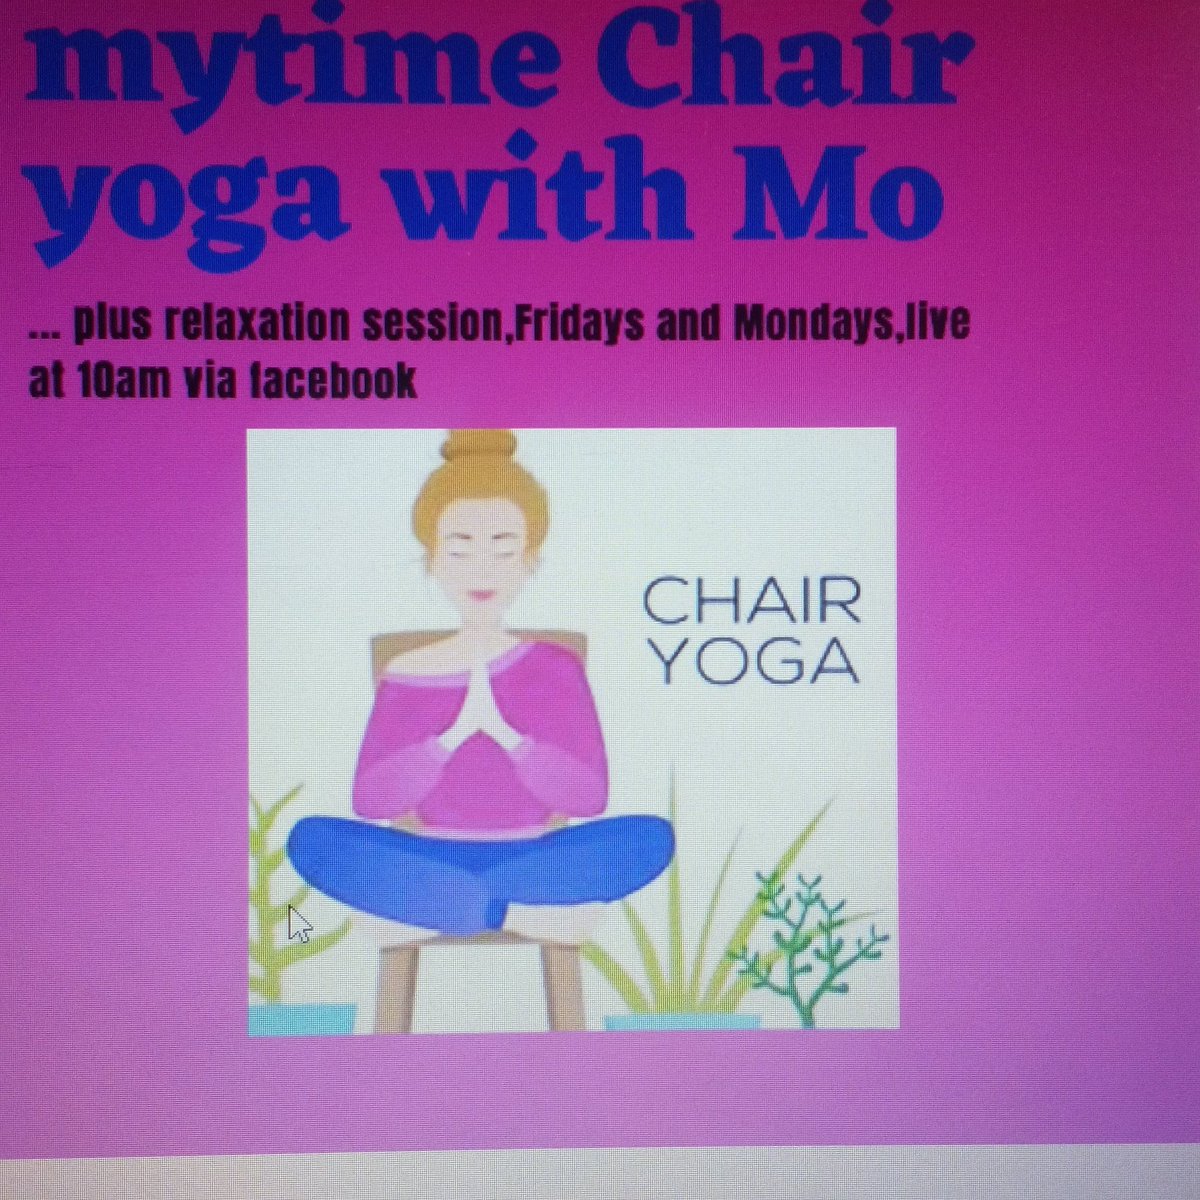 Carers chair yoga today at 10am via Facebook... Great for some #MondayMotivation #breaks #chairyoga @LivCCHealth @LivCarersCentre @LiveWellLpool